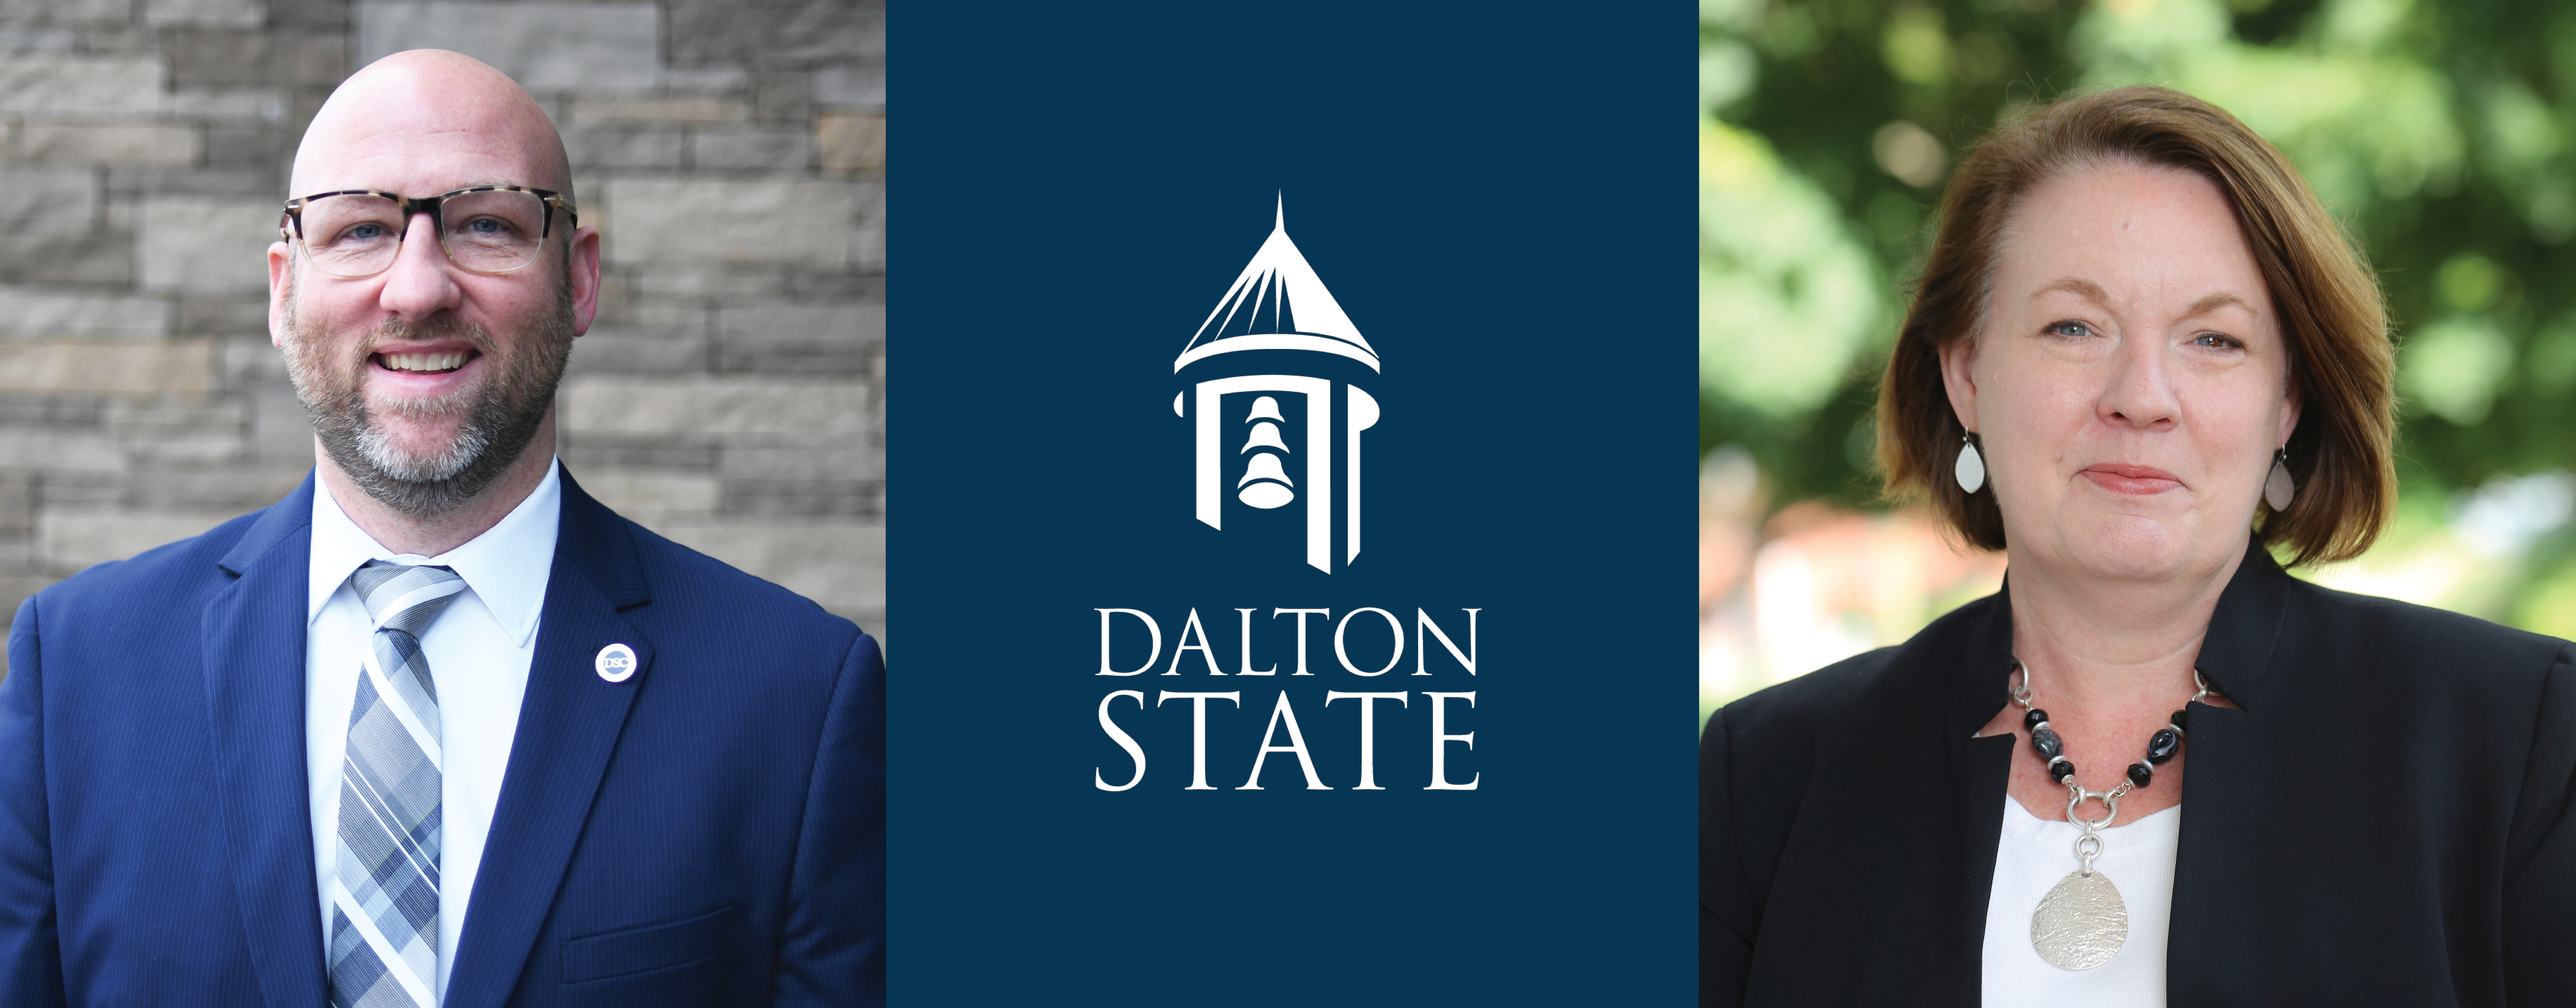 David Lesicko was named vice president for fiscal affairs, and Kate Maine was named vice president for marketing, communications and workforce development.